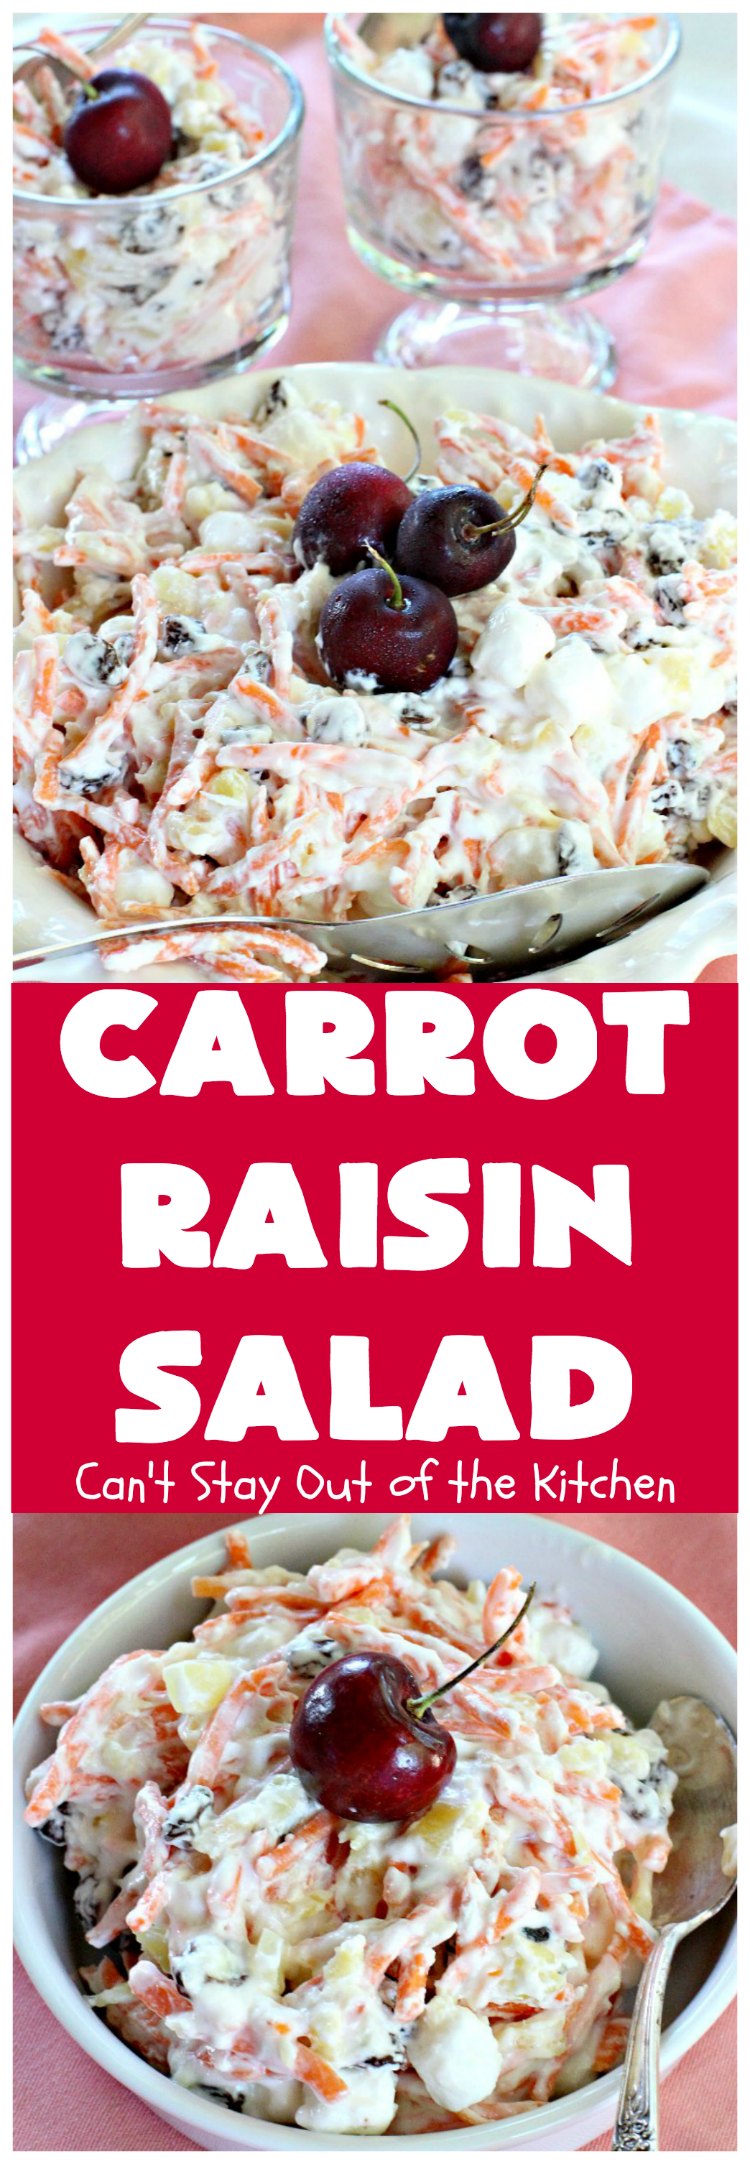 Carrot Raisin Salad | Can't Stay Out of the Kitchen